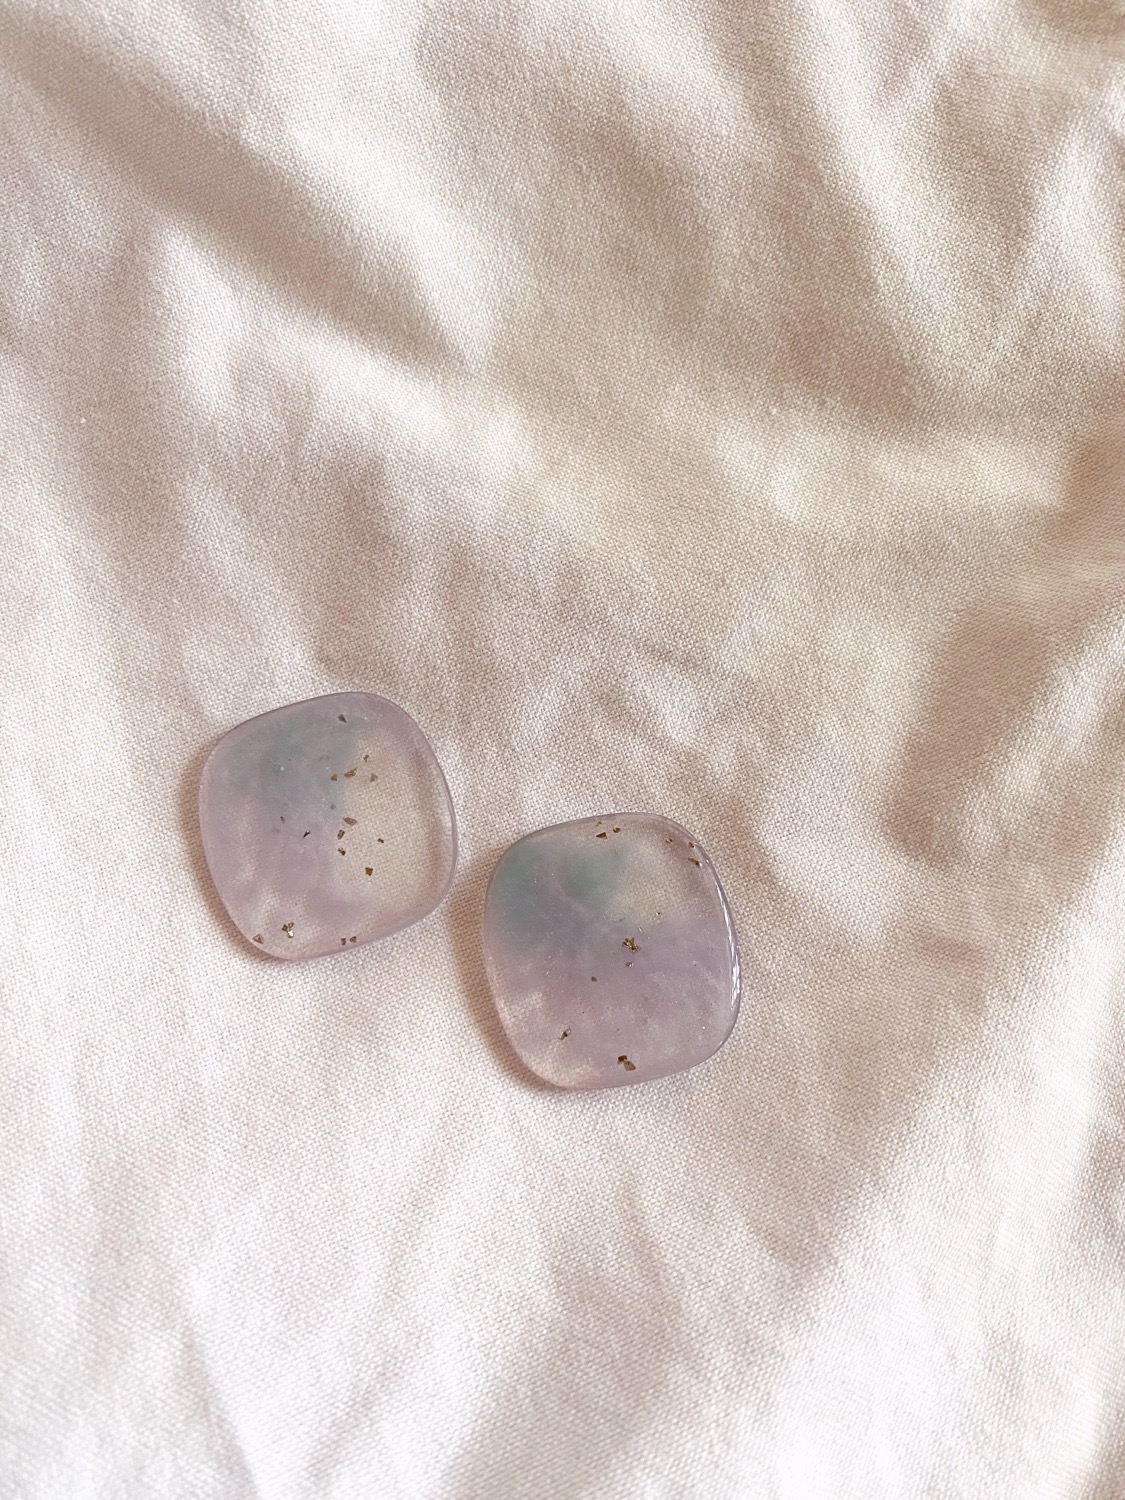 Large Cquare Resin Stud - Powder Lucent Resin Earrings, Resin Jewelry